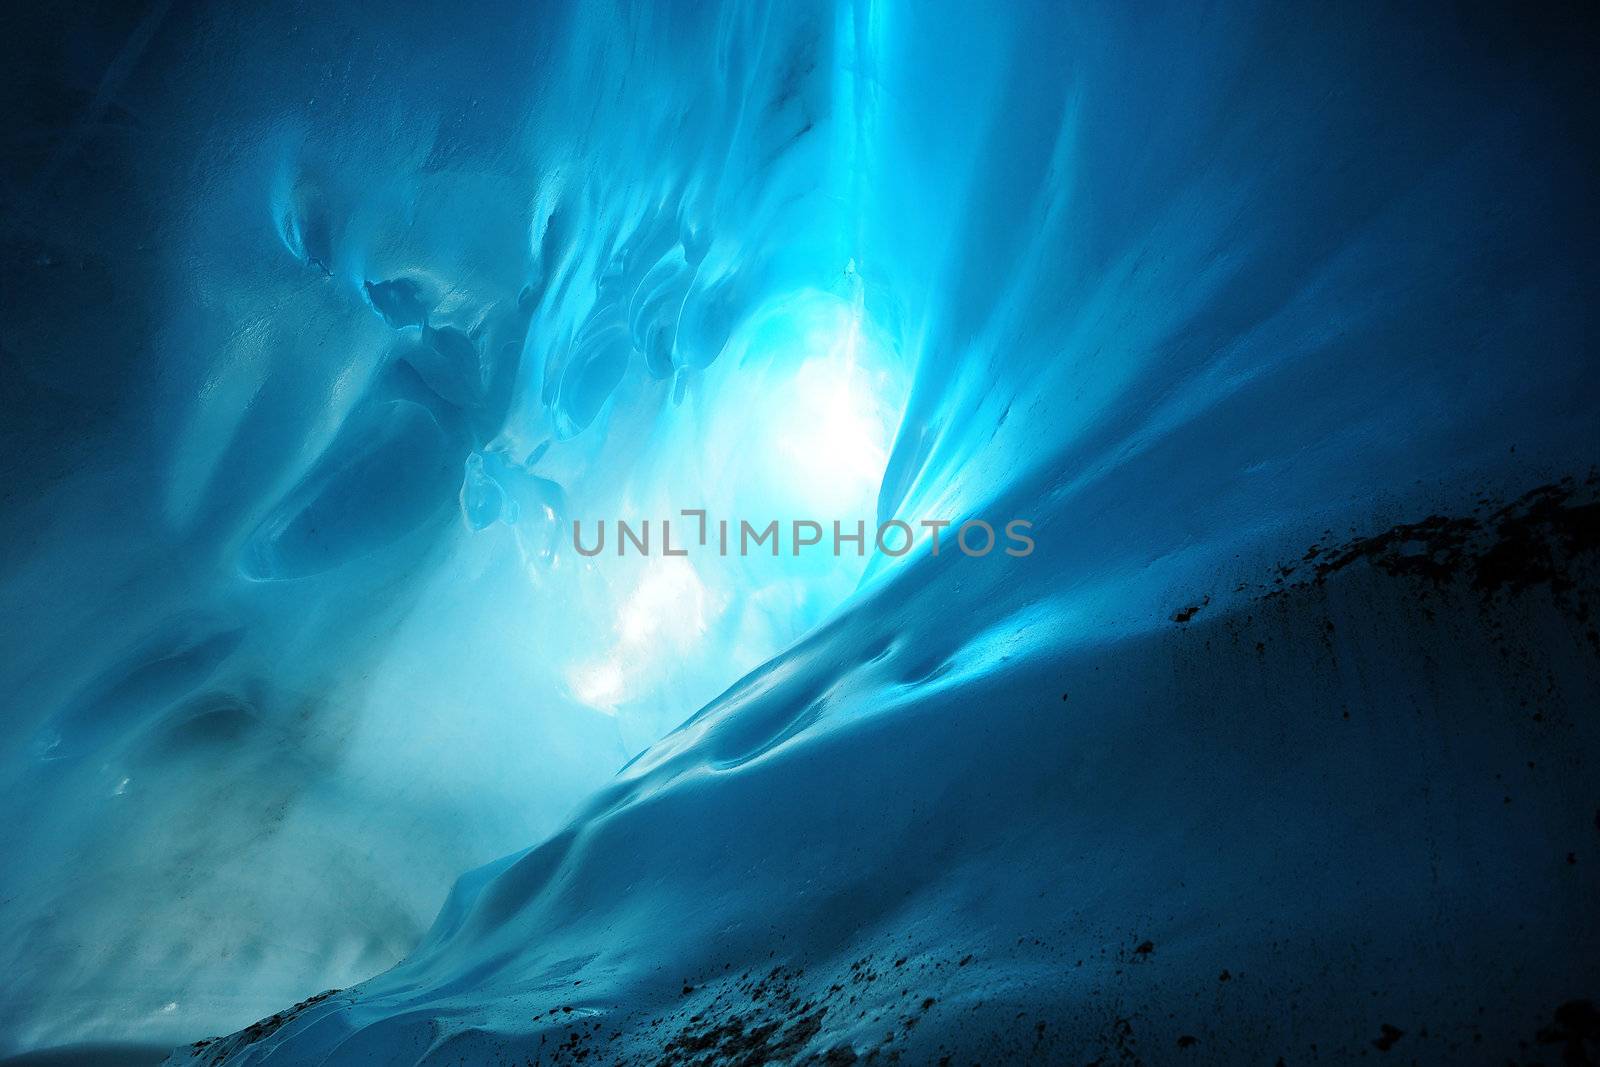 Light in a blue ice cave with curves of ice on the wall, from Root Glacier, Alaska